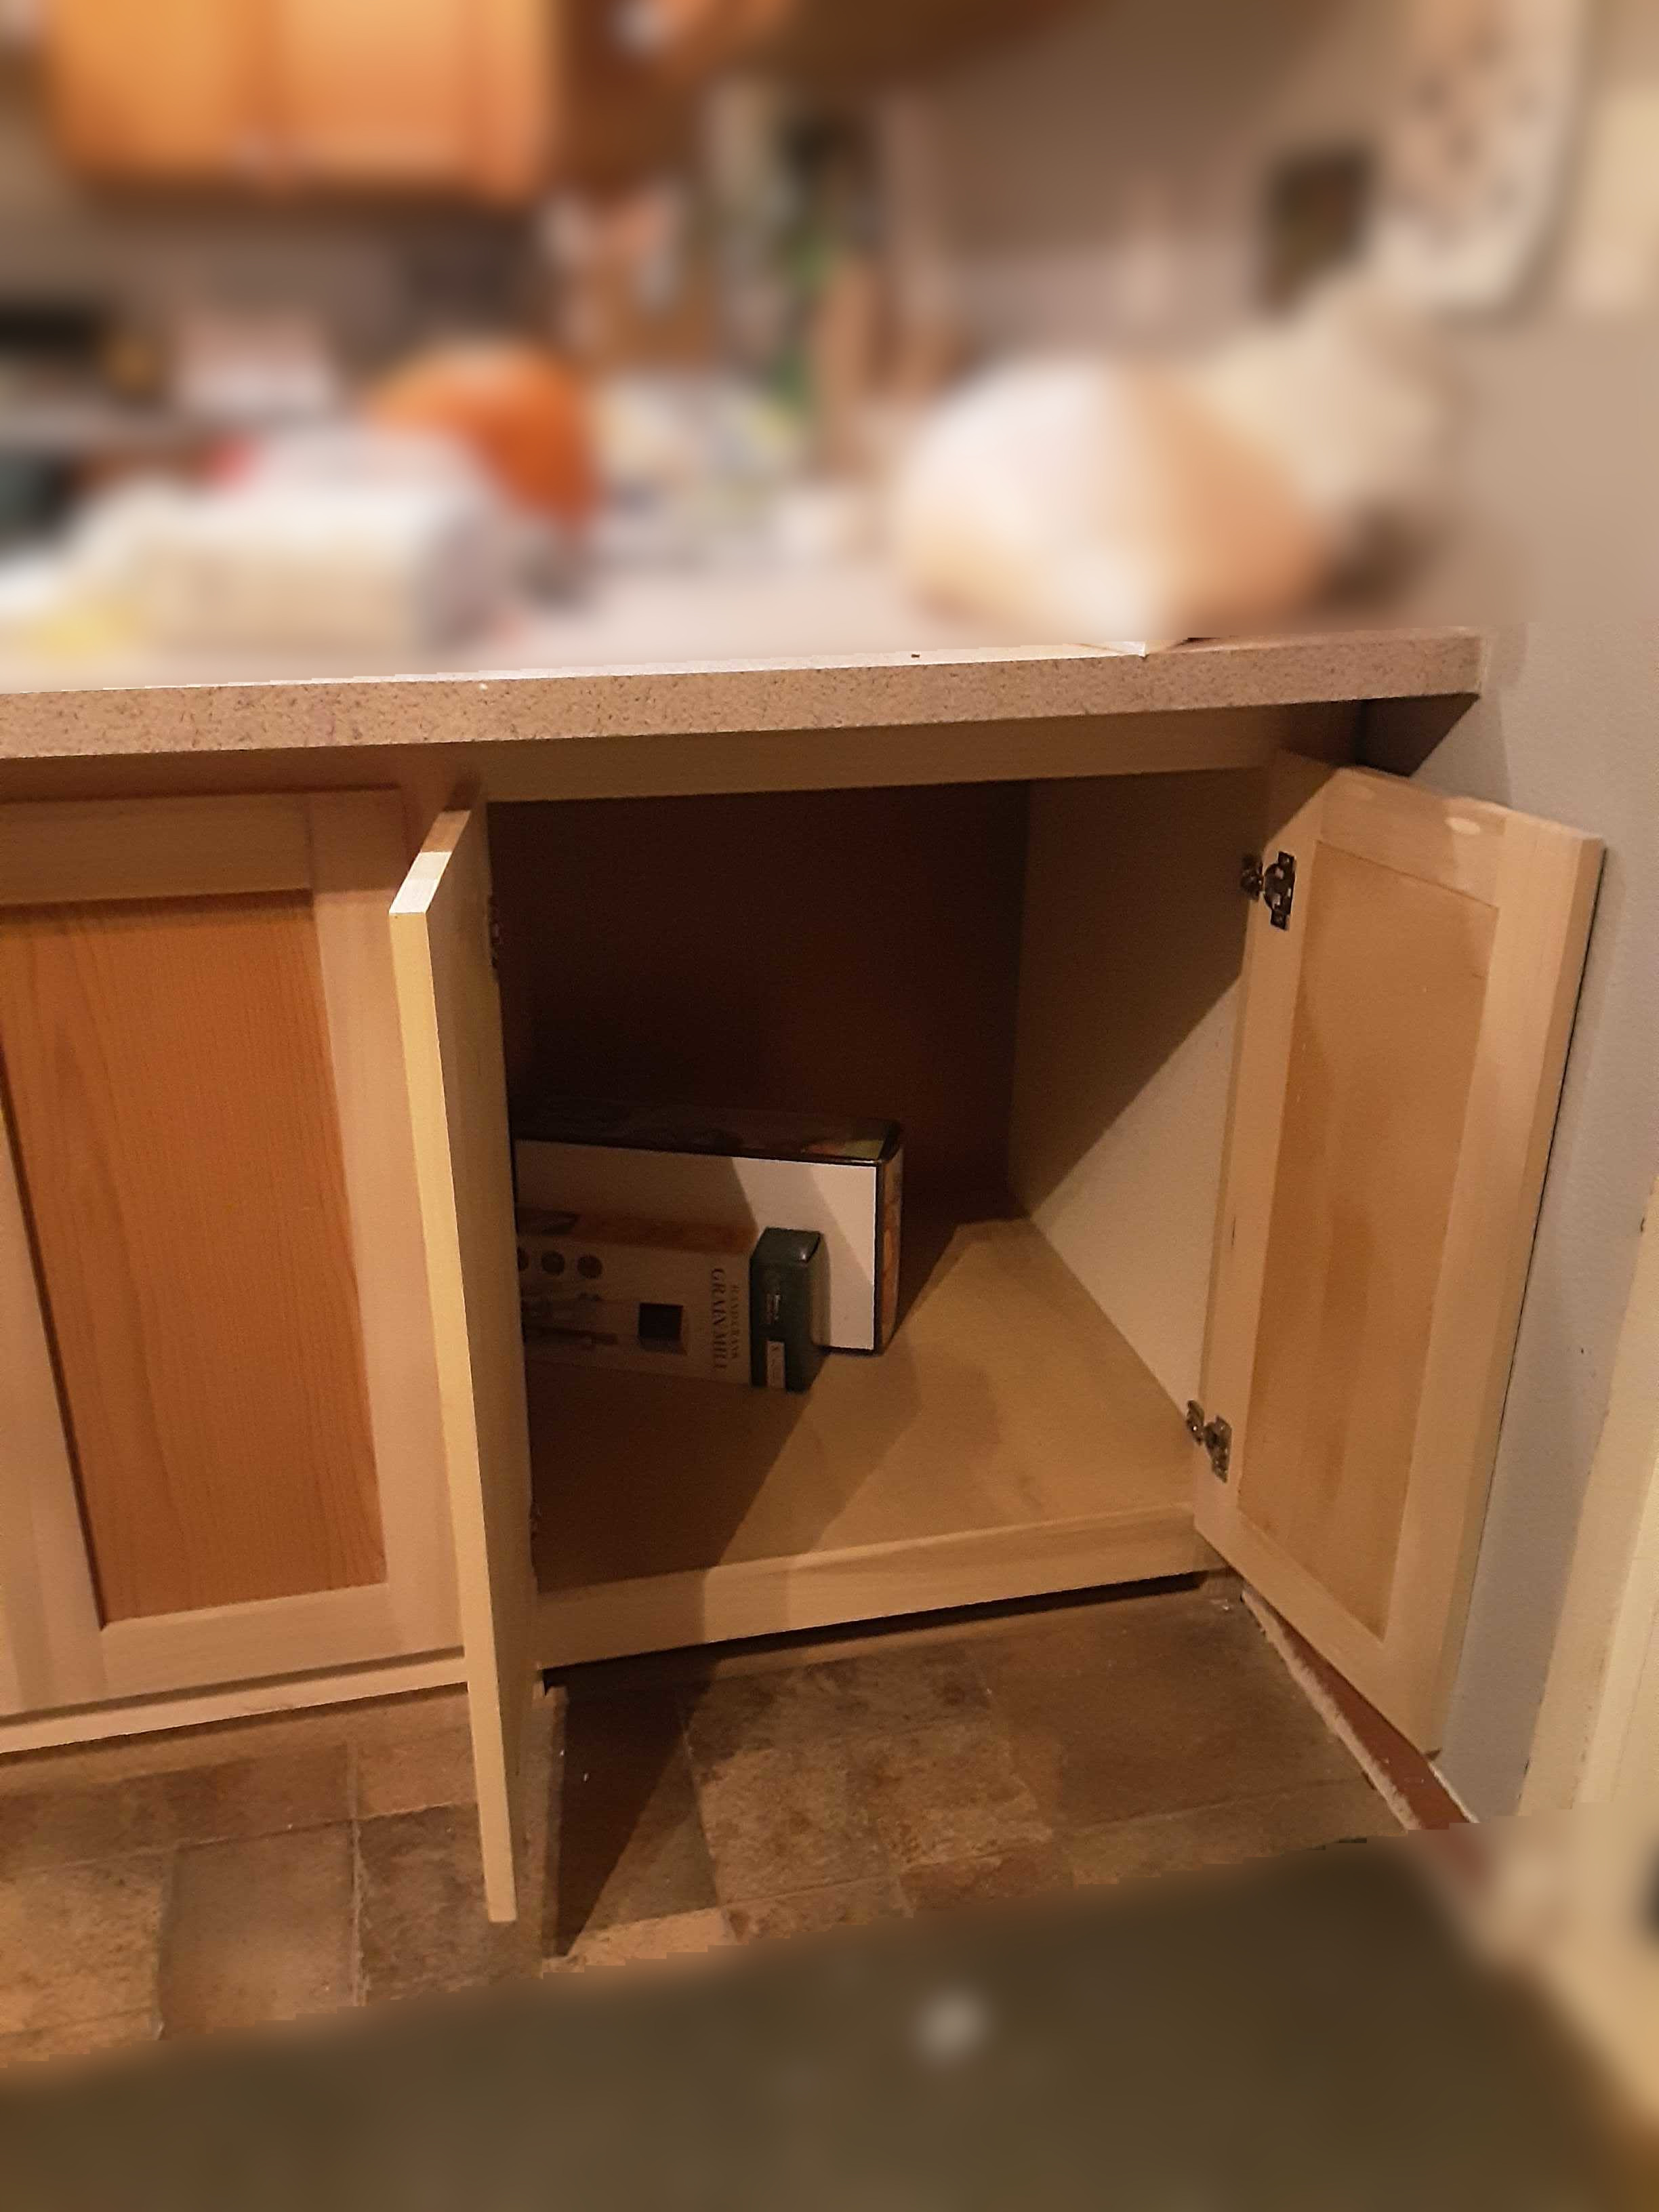 2020-10-26_214618-new-cabinet-in-void-cropped.jpg